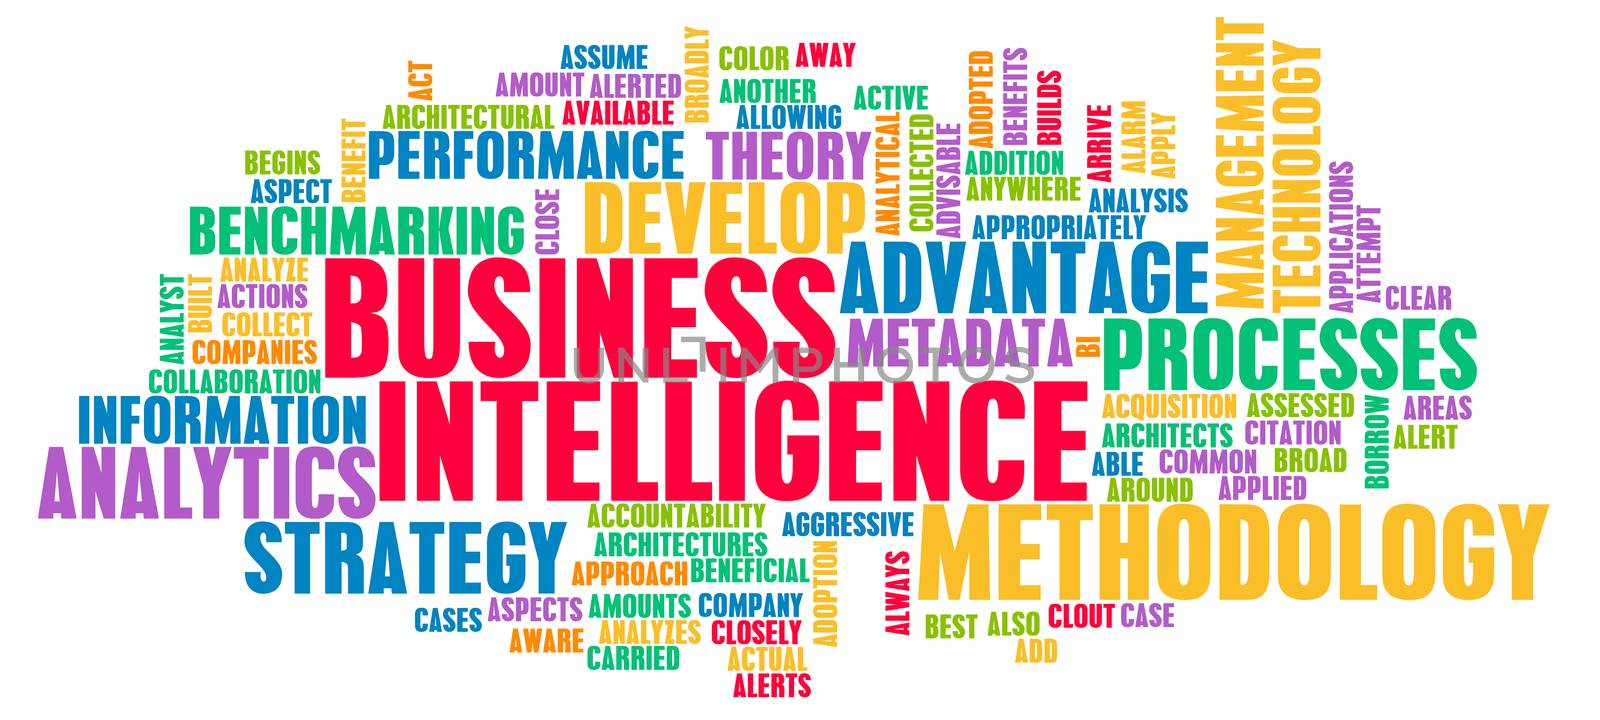 Business Intelligence and Analytics with Data Art